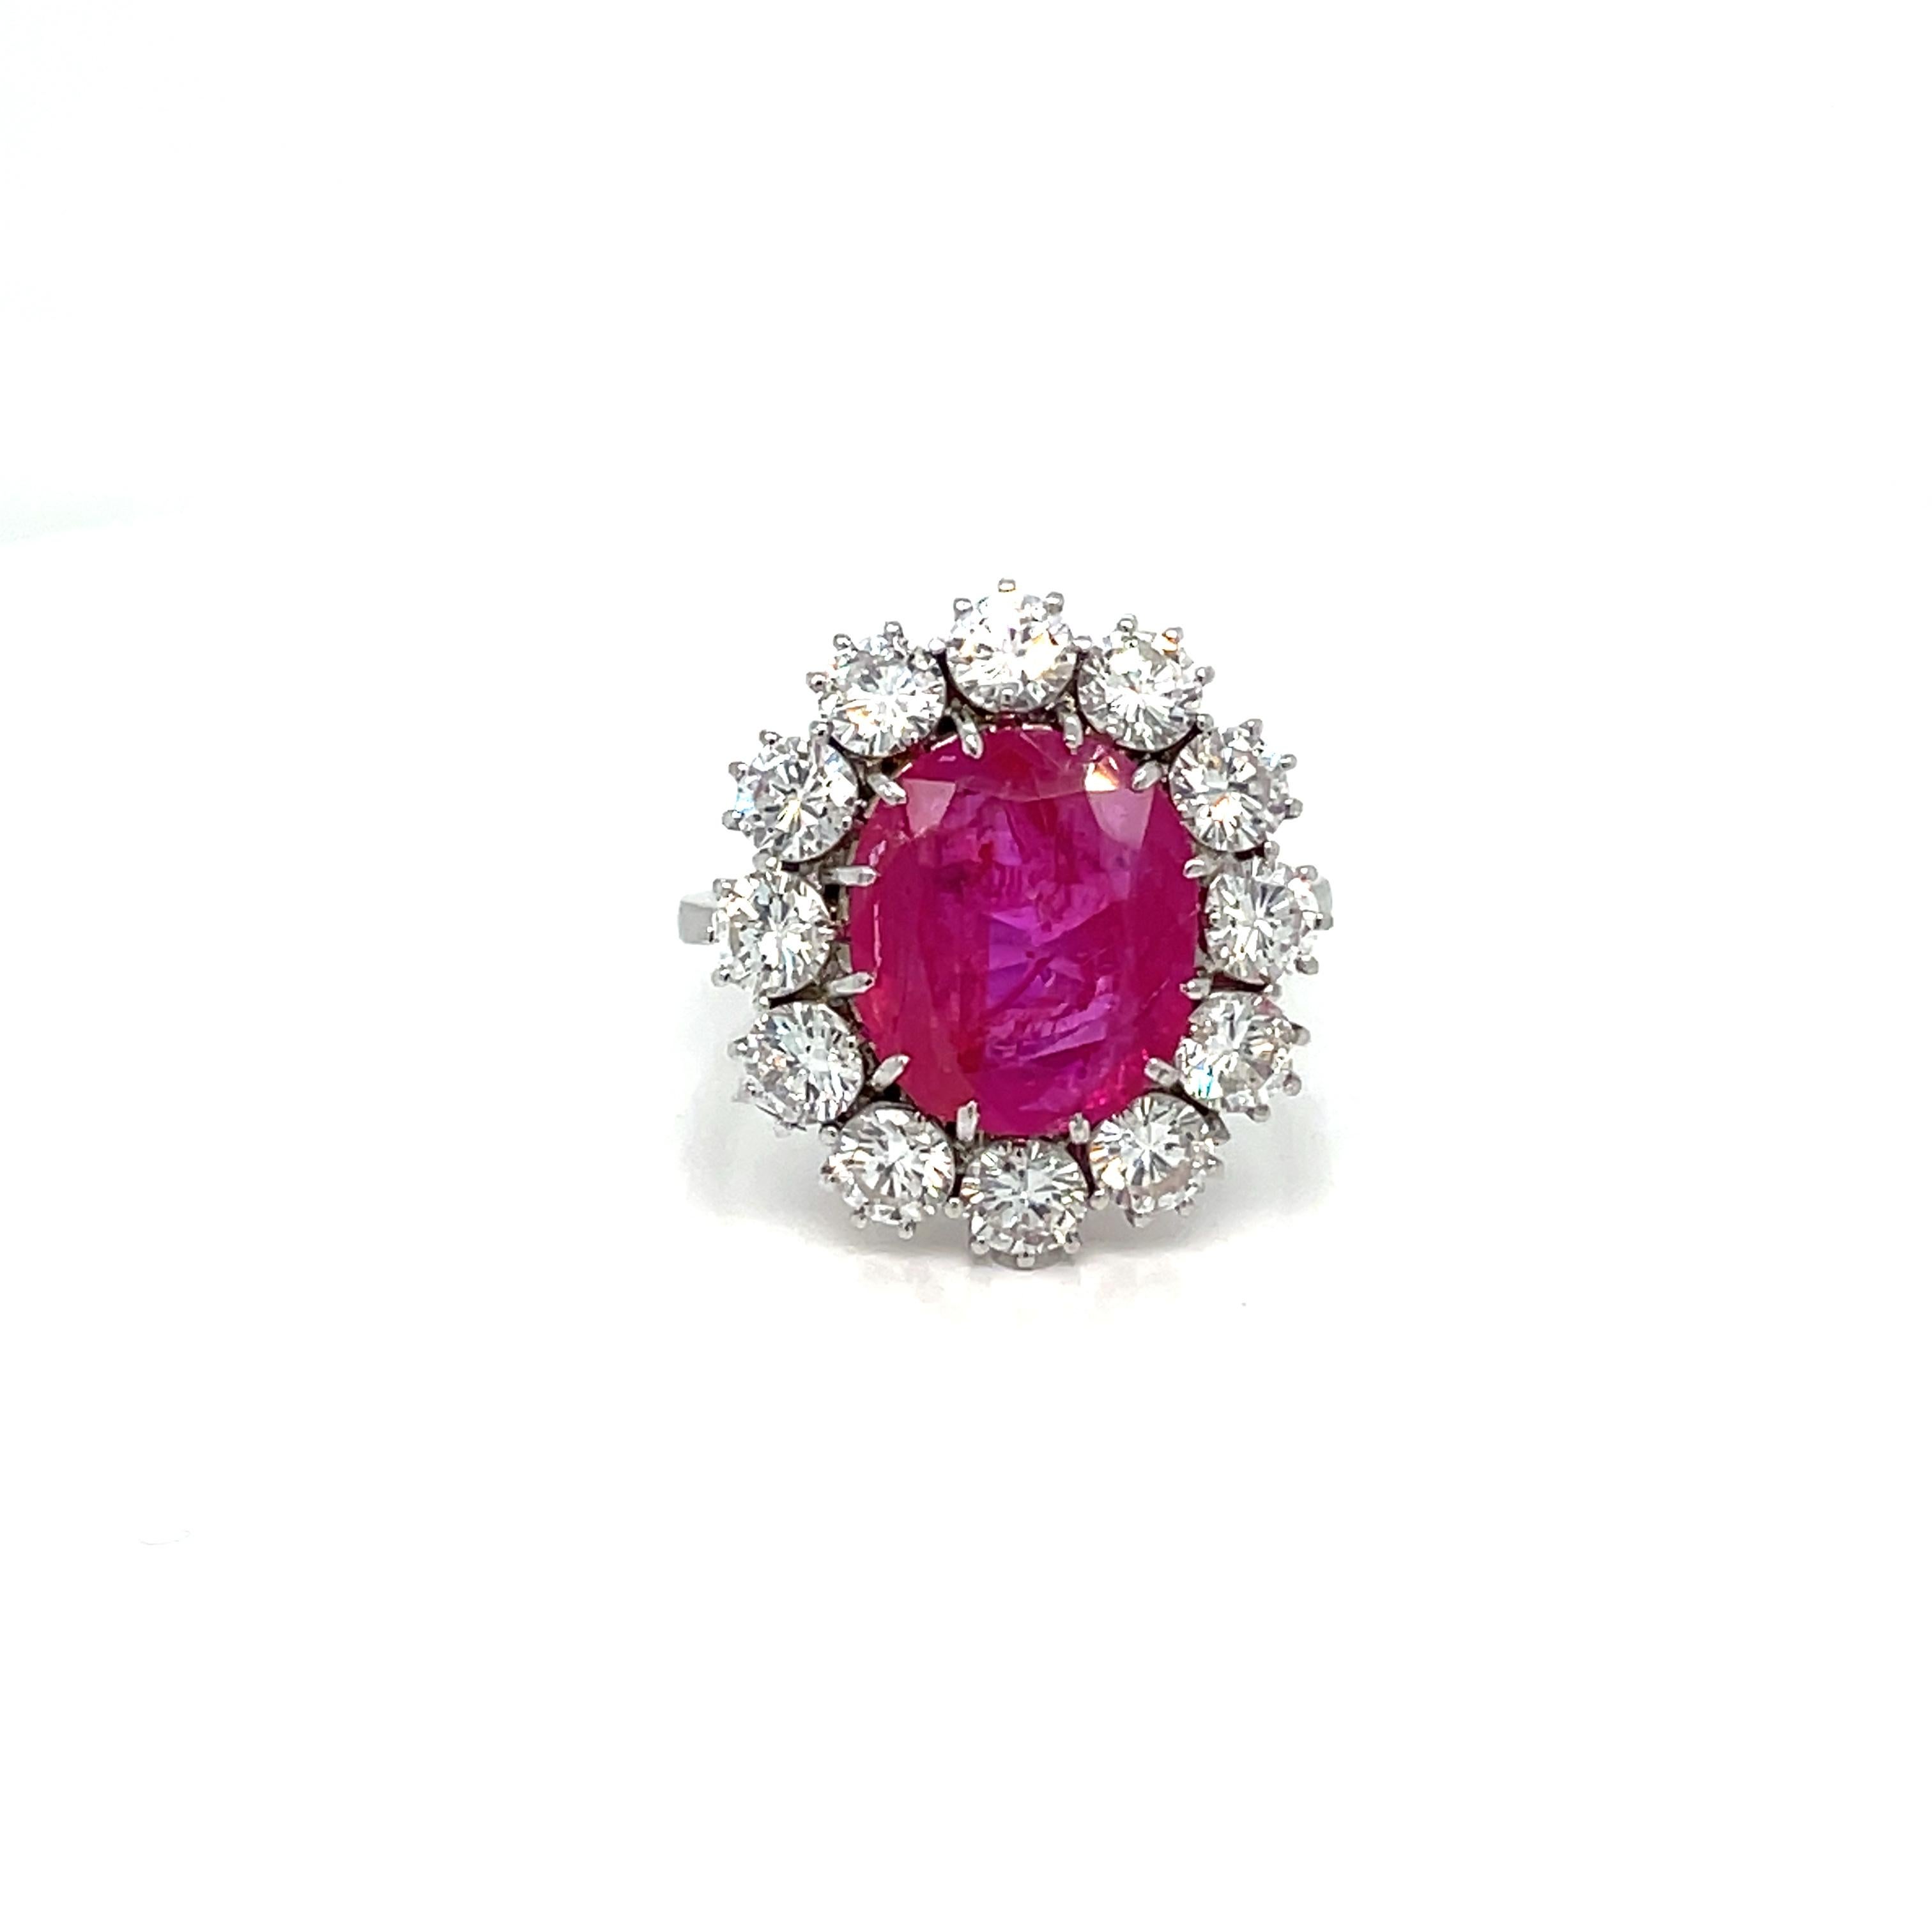 Exceptional 18k white Gold cluster ring features a large 4.51 Carat oval-cut Natural Unheated Ruby, origin Burma, surrounded by round brilliant cut Diamonds for a total approx. weight of 2.20 carats color H/I  Vs clarity.
The Ruby is accompanied by